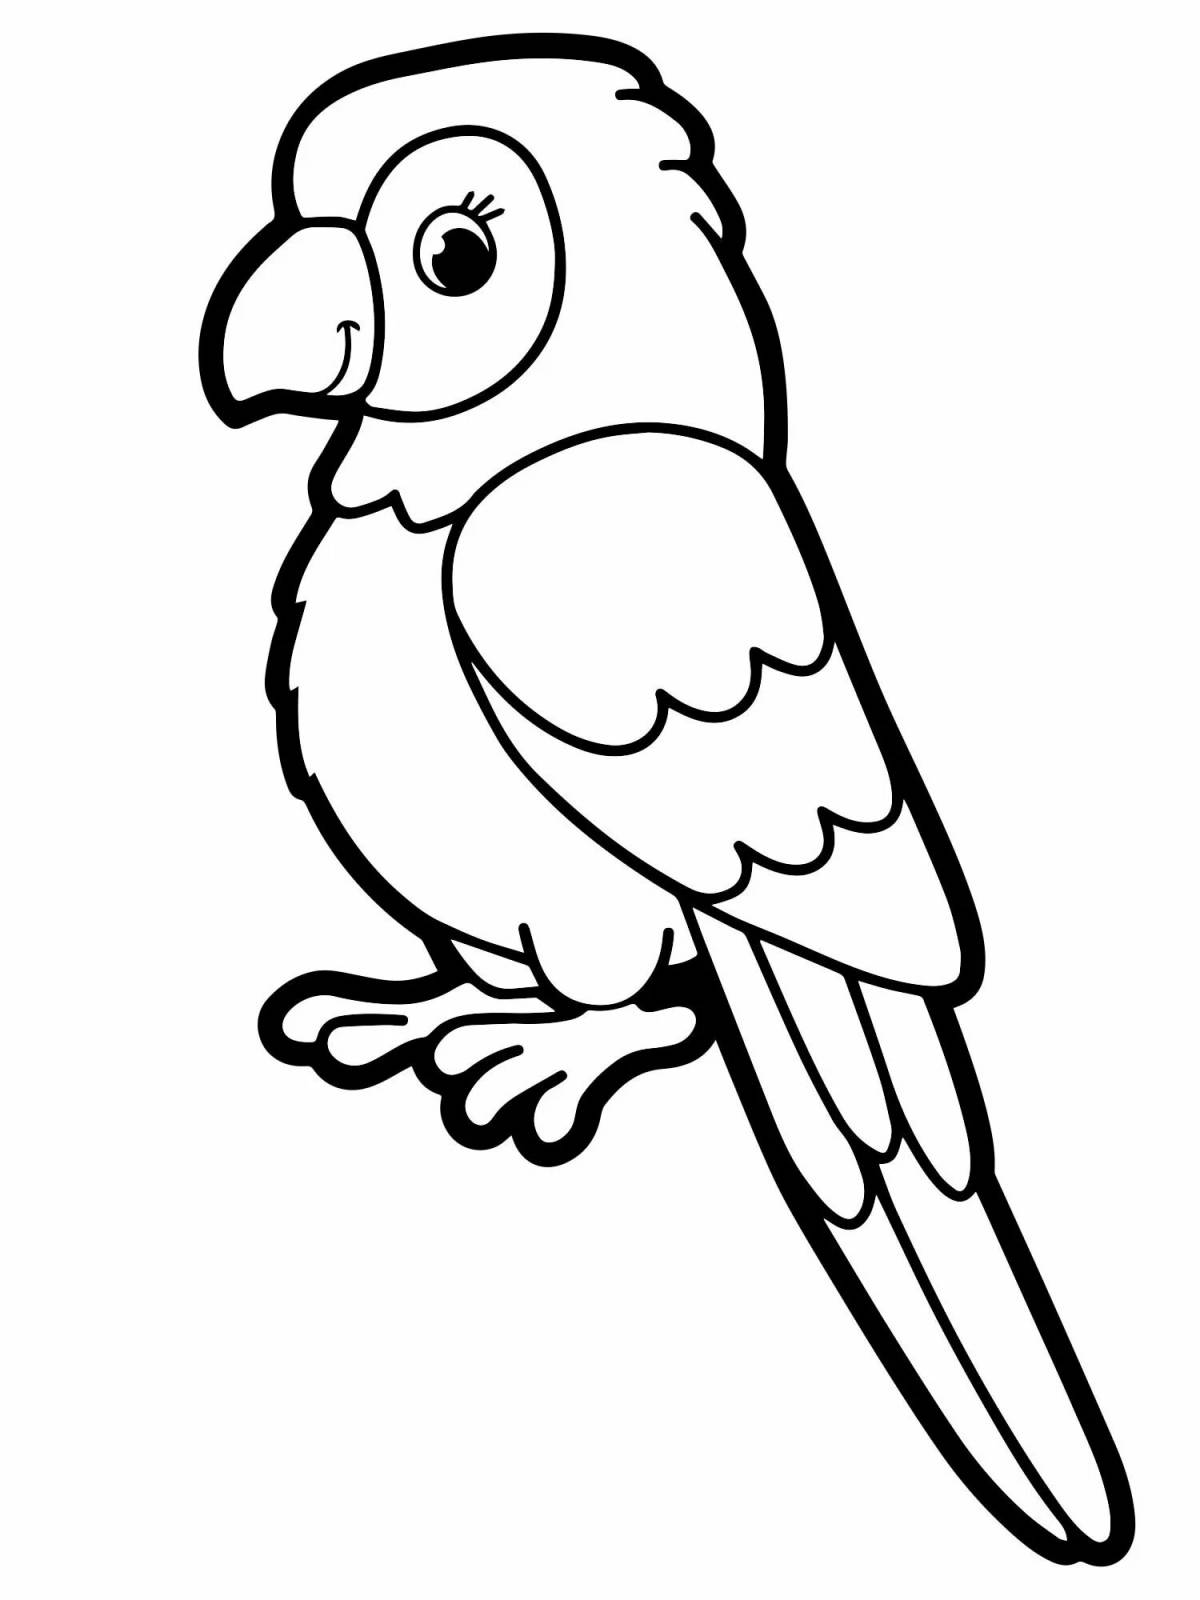 Incredible parrot coloring book for kids 3-4 years old